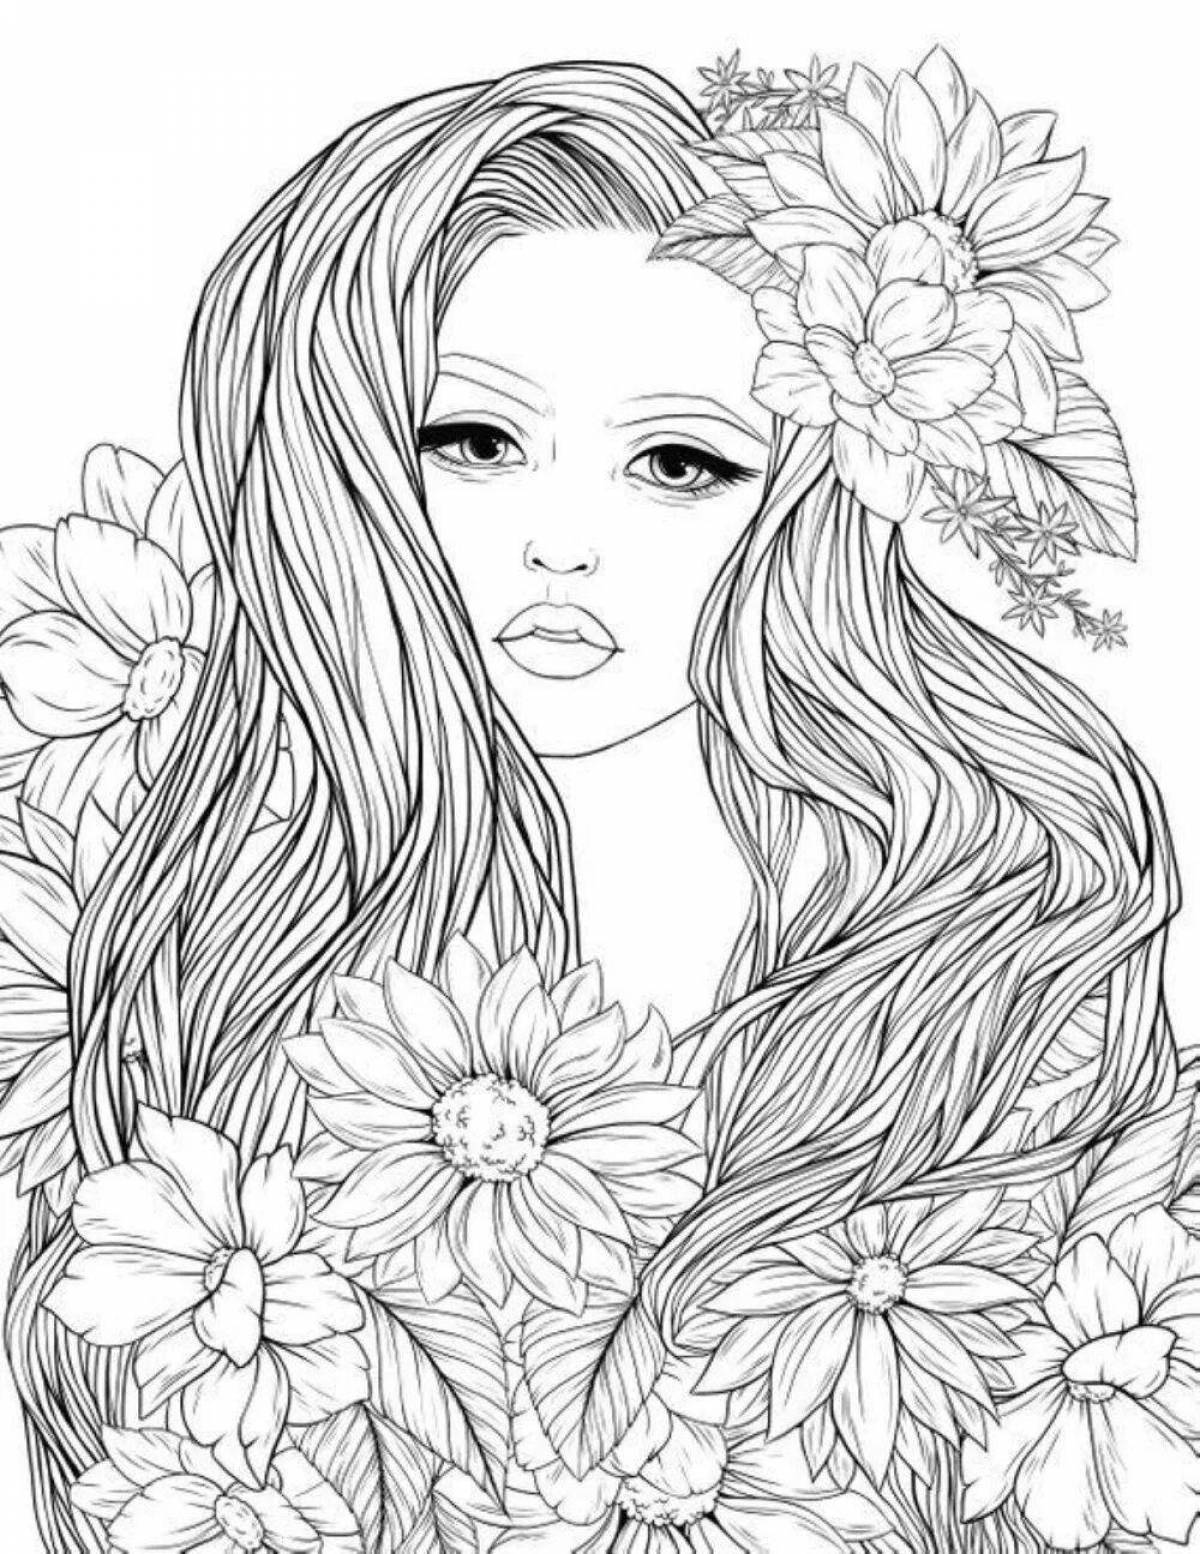 30 year dreamy coloring book for girls